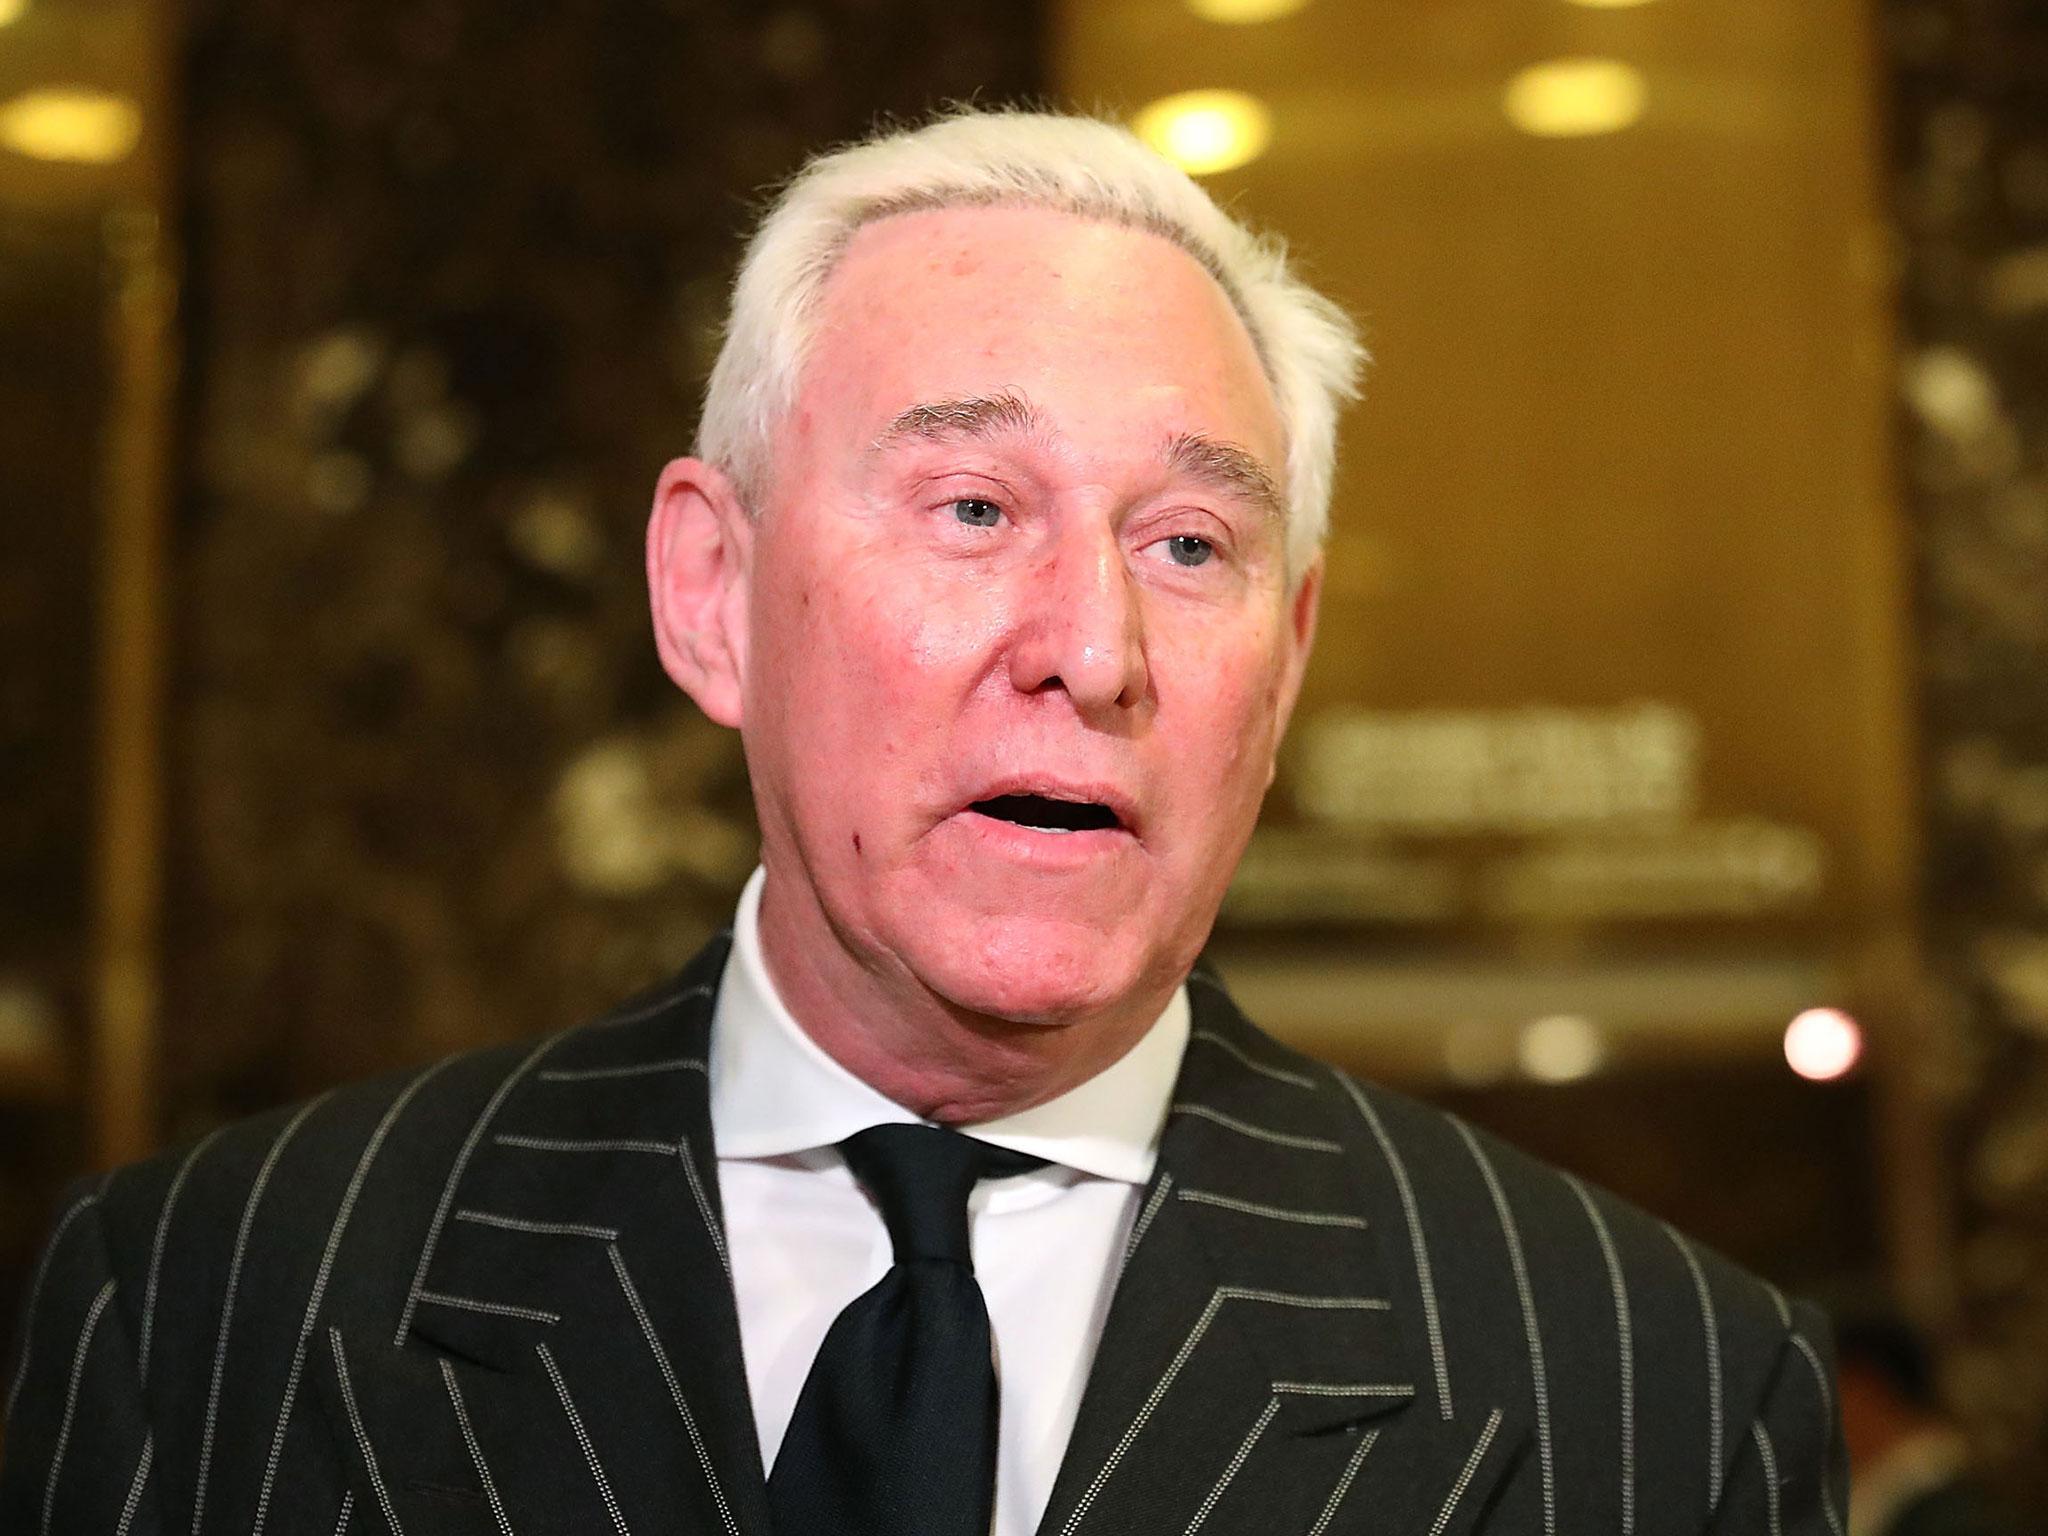 Roger Stone advised Donald Trump during his presidential campaign and reportedly remains ‘a confidant to Trump’